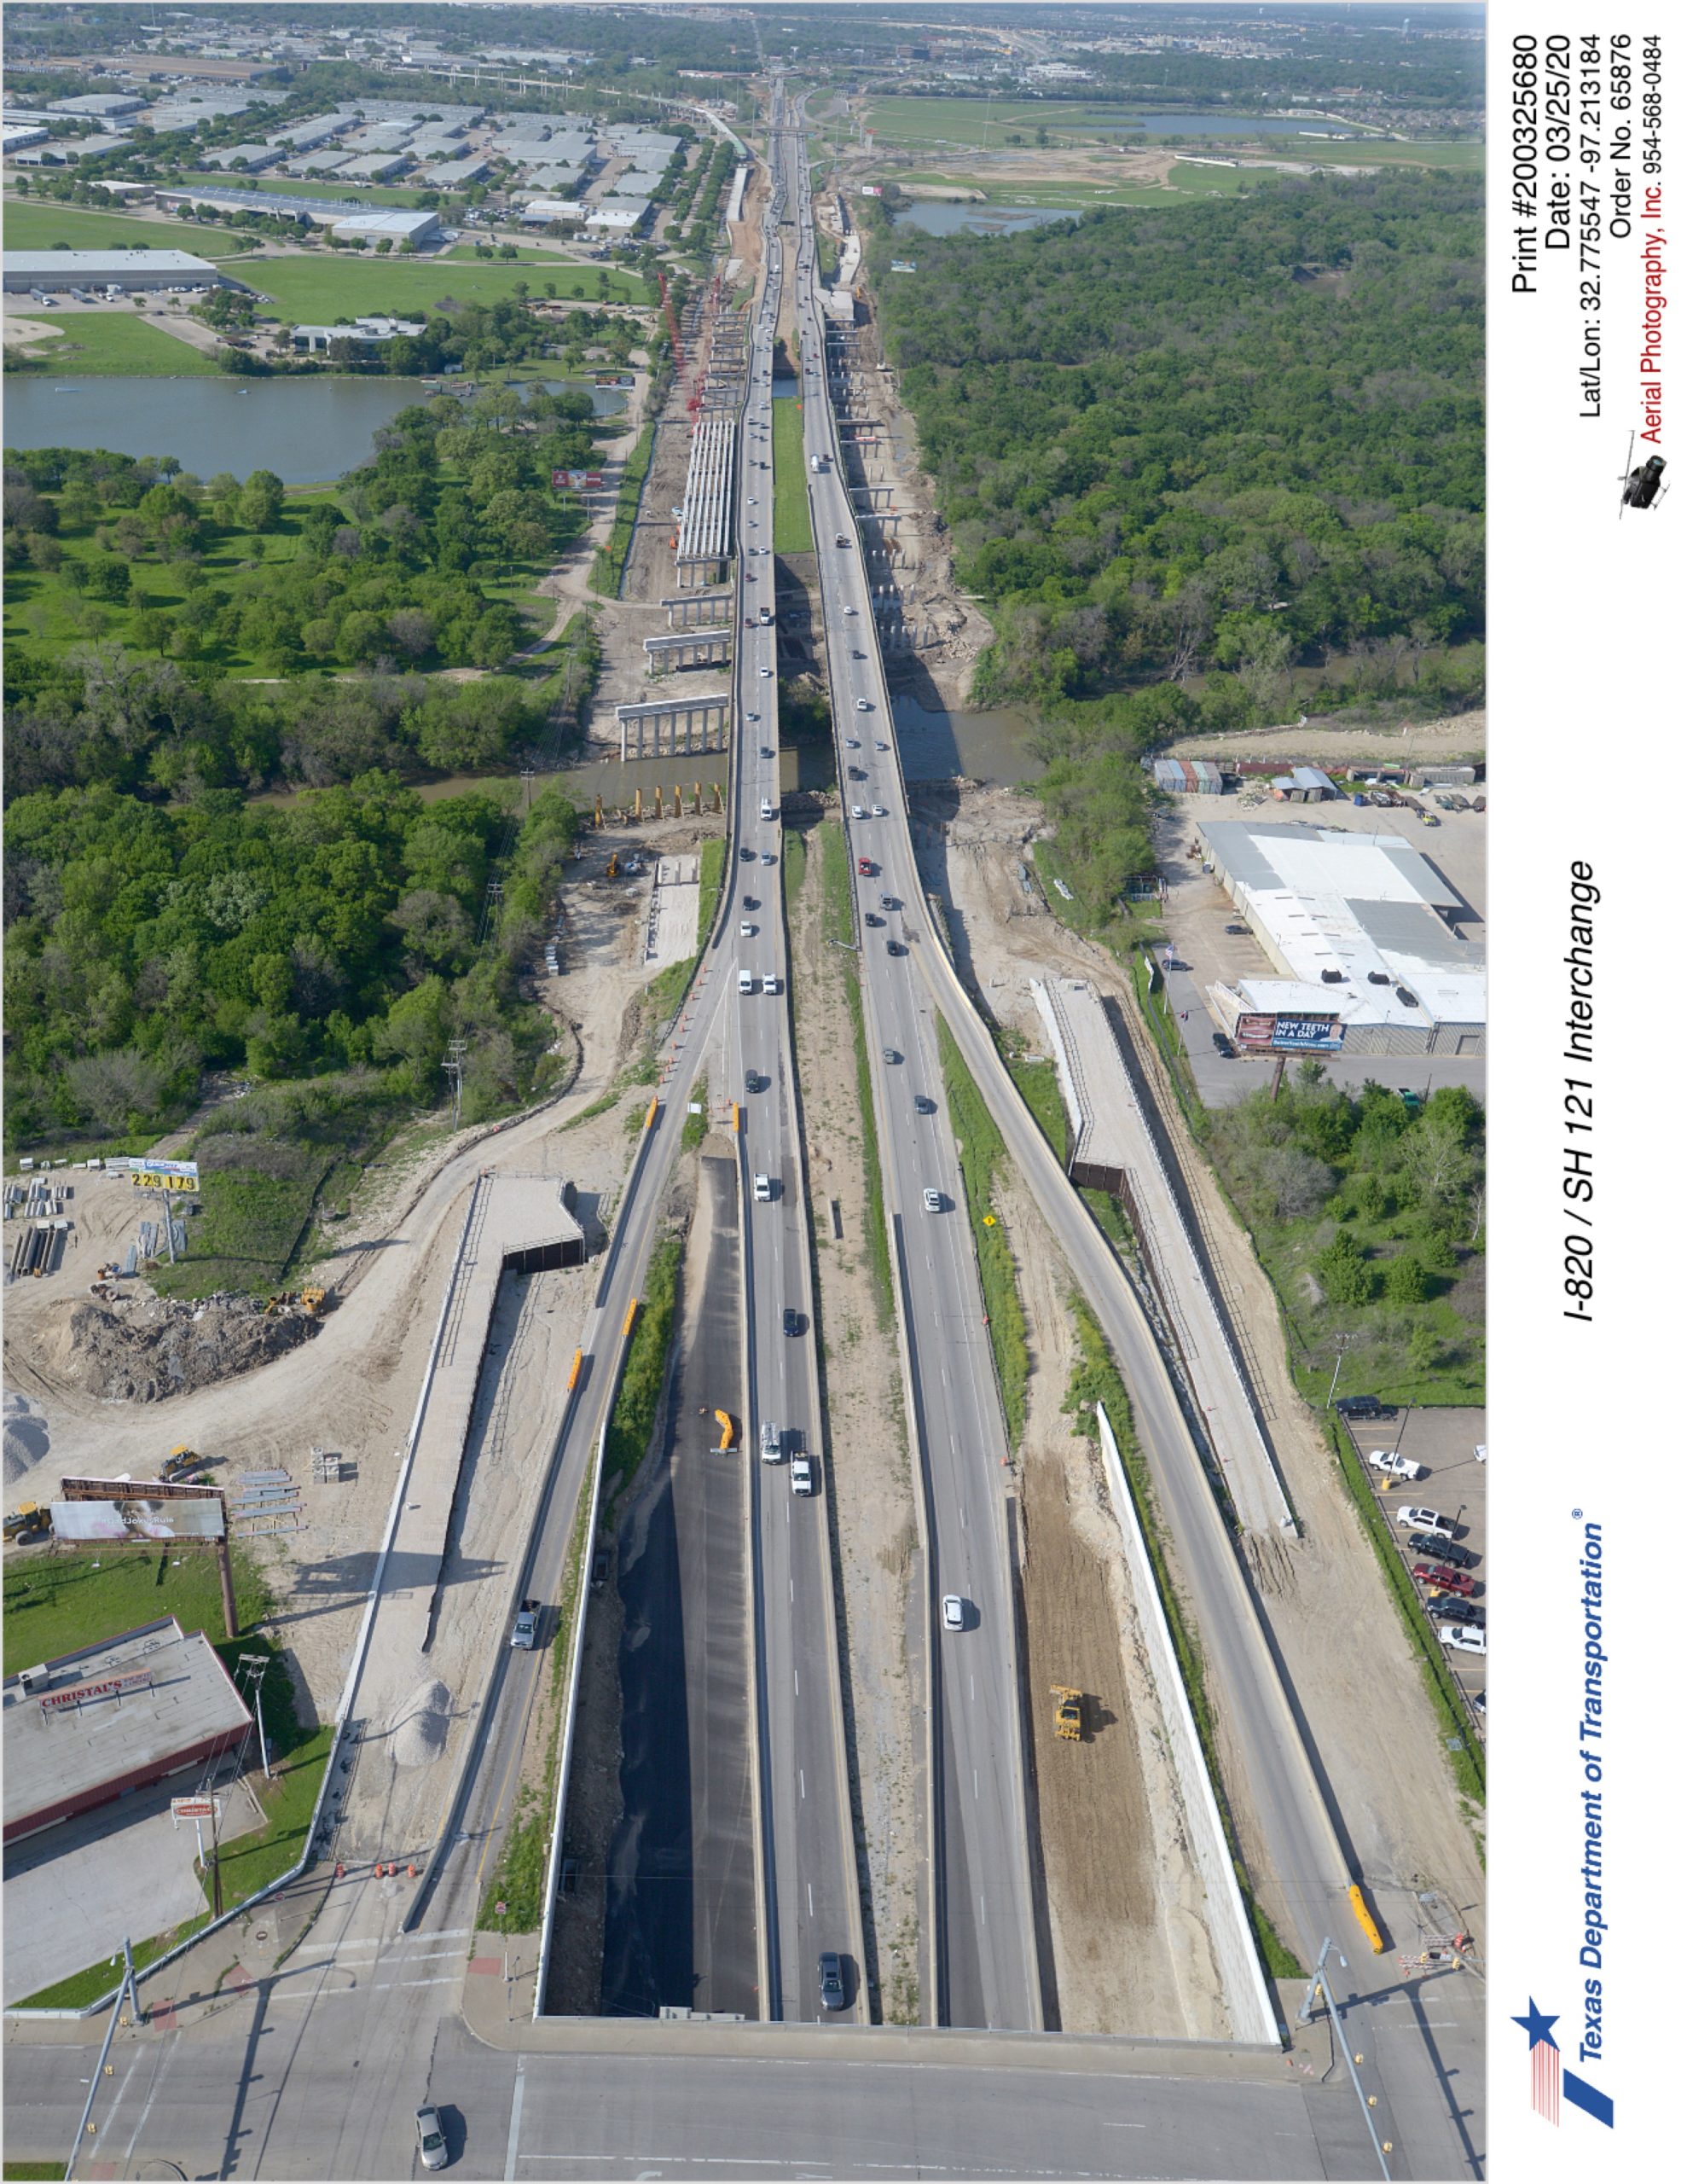 I-820 looking north over Randol Mill Rd. Construction seen for southbound mainalnes over the Trinity River.